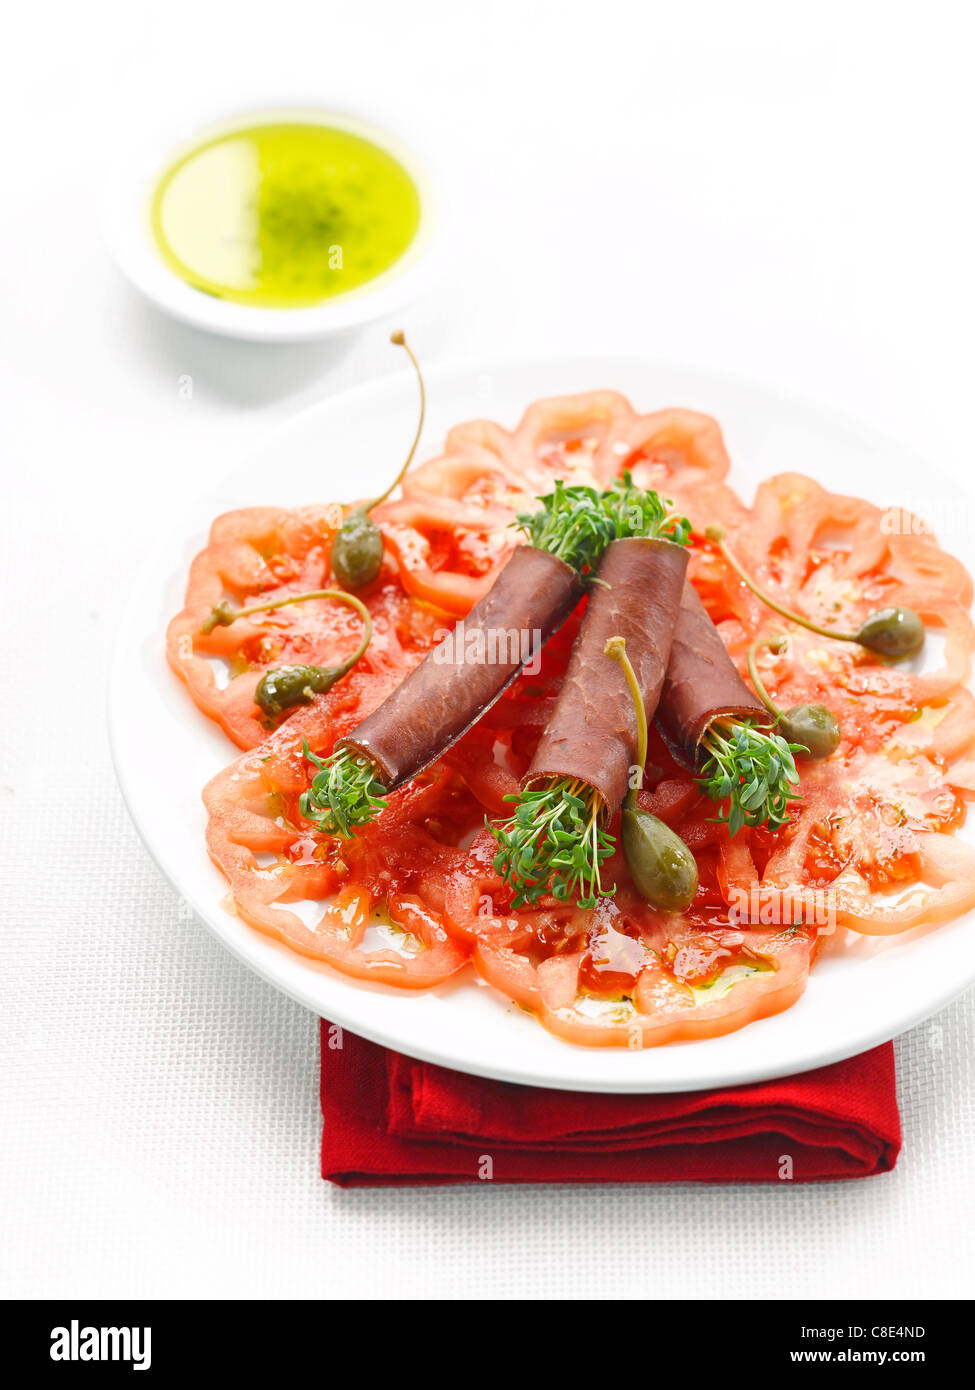 Coeur de boeuf tomato carpaccio and grisons meat rolls filled with capers  Stock Photo - Alamy